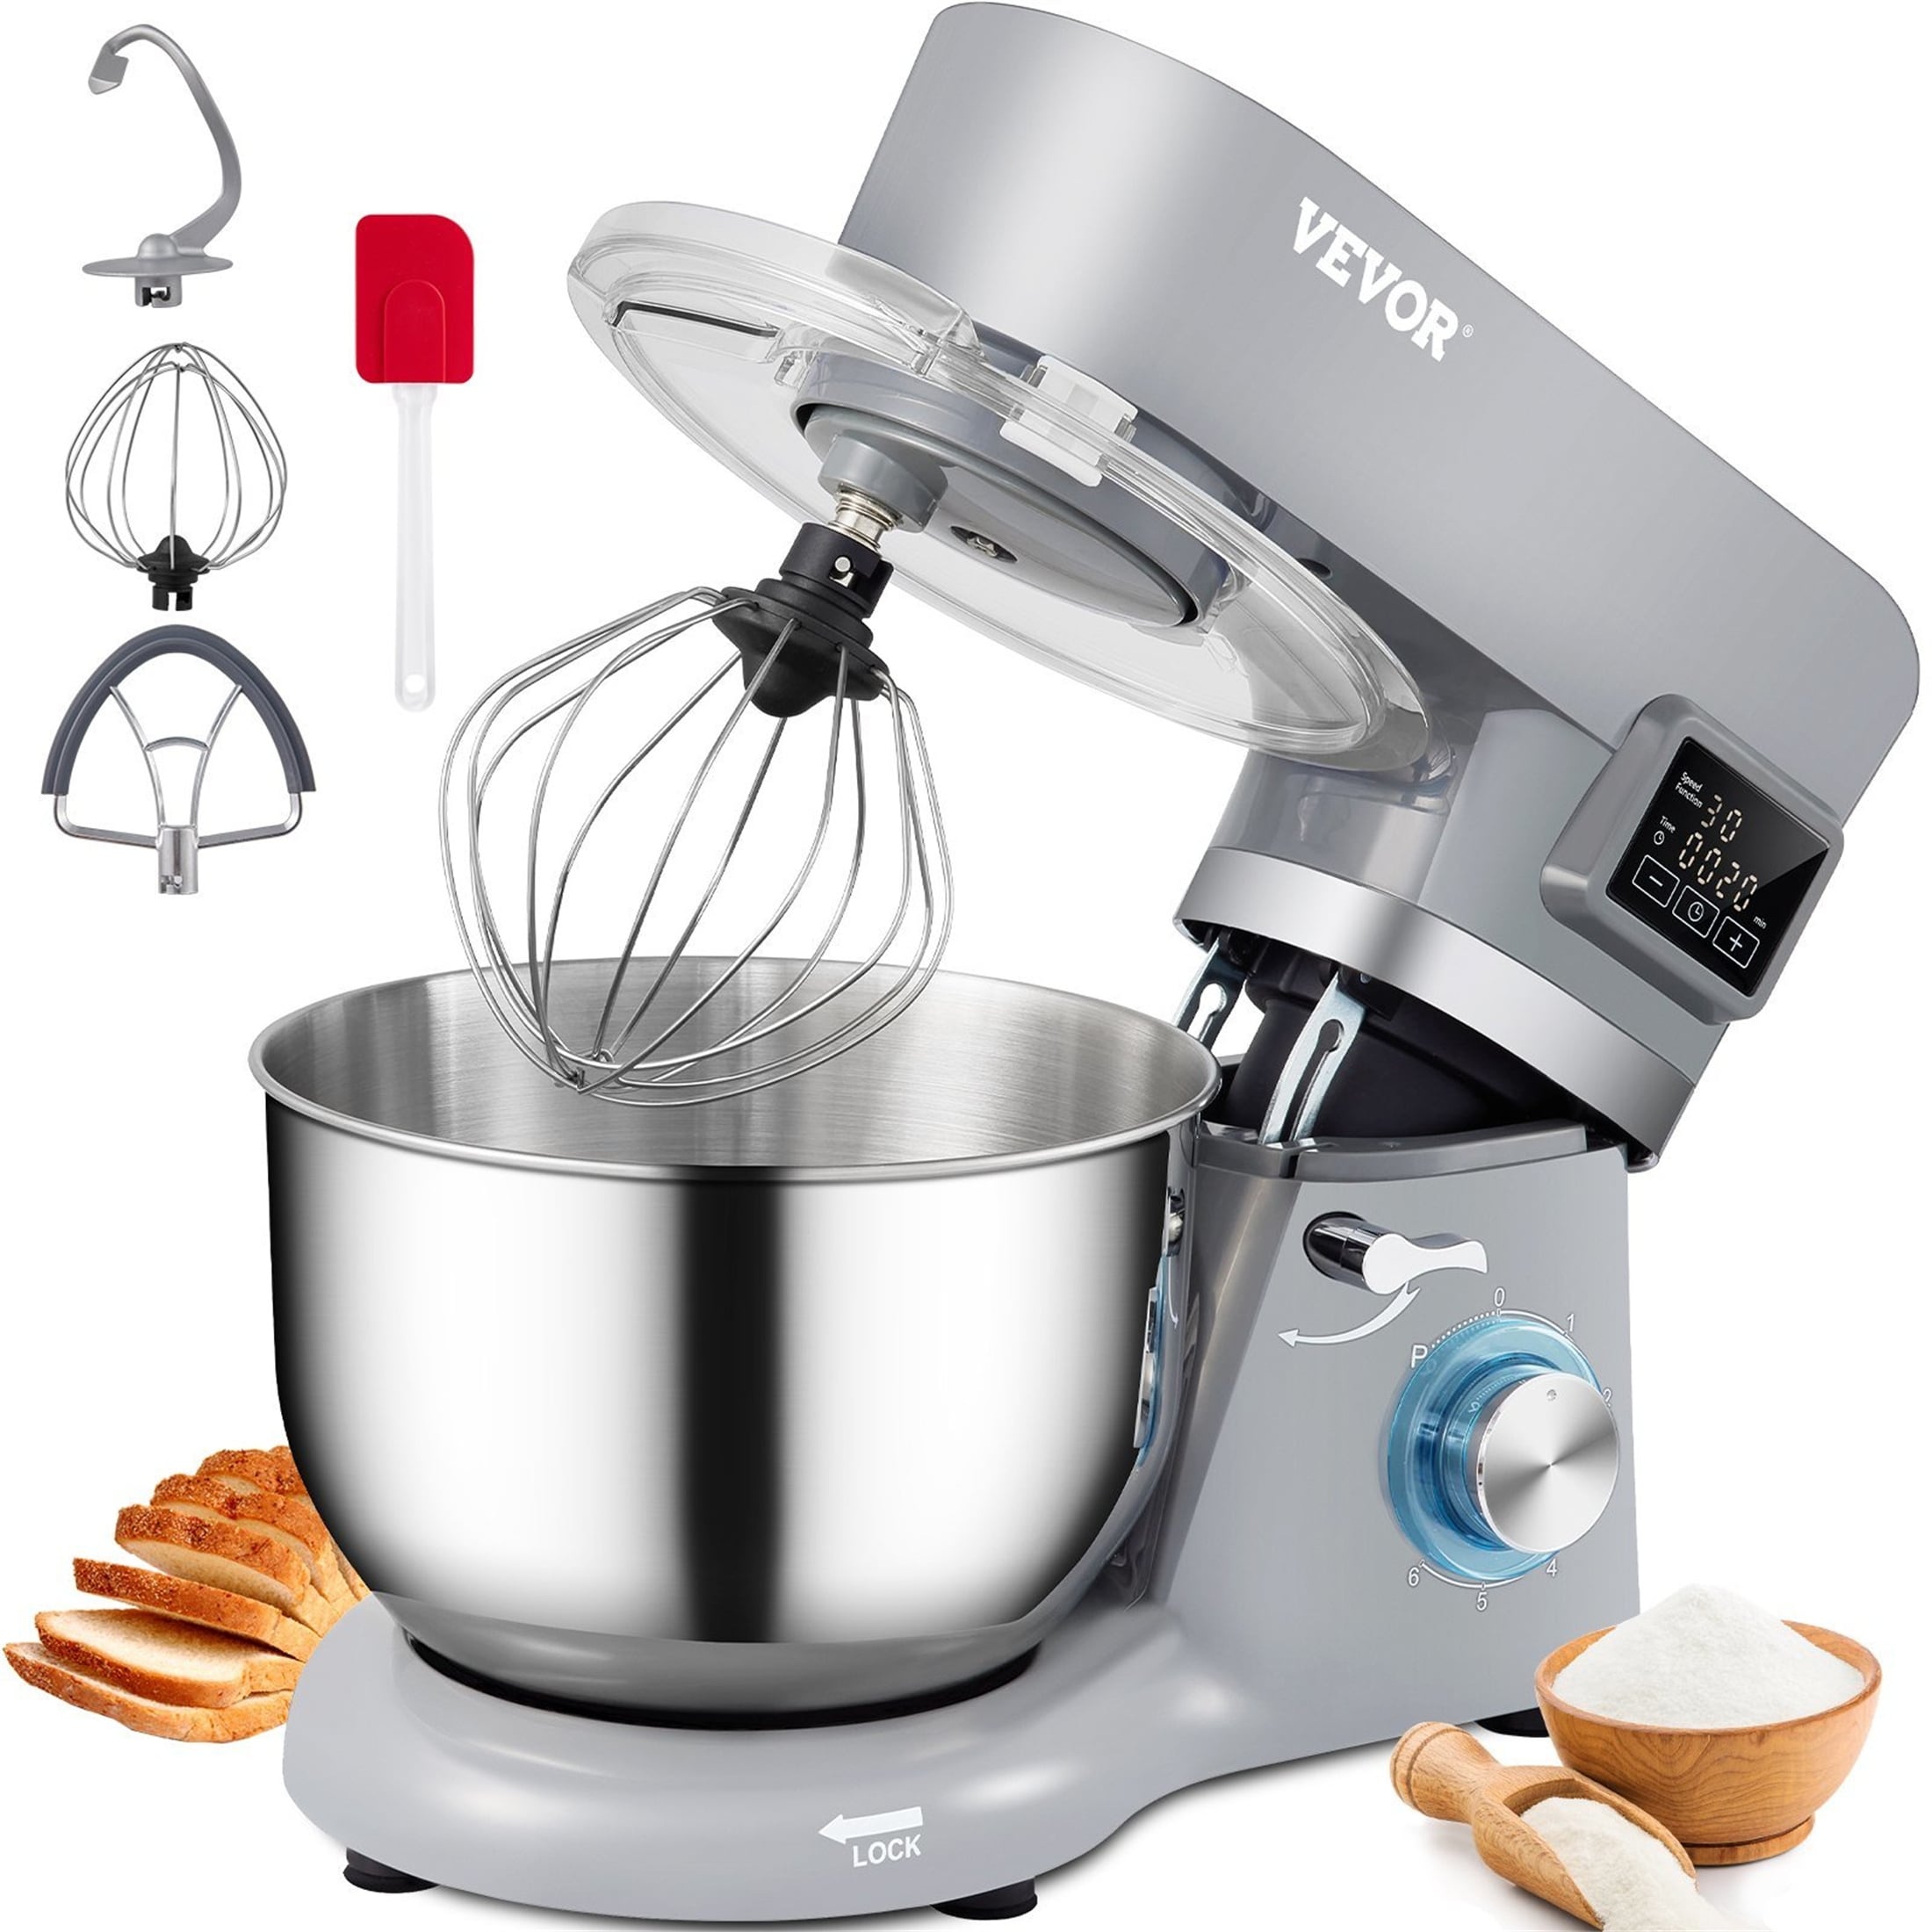 Costway 4.8 QT Stand Mixer 8-speed Electric Food Mixer, Dough Hook Beater  White 